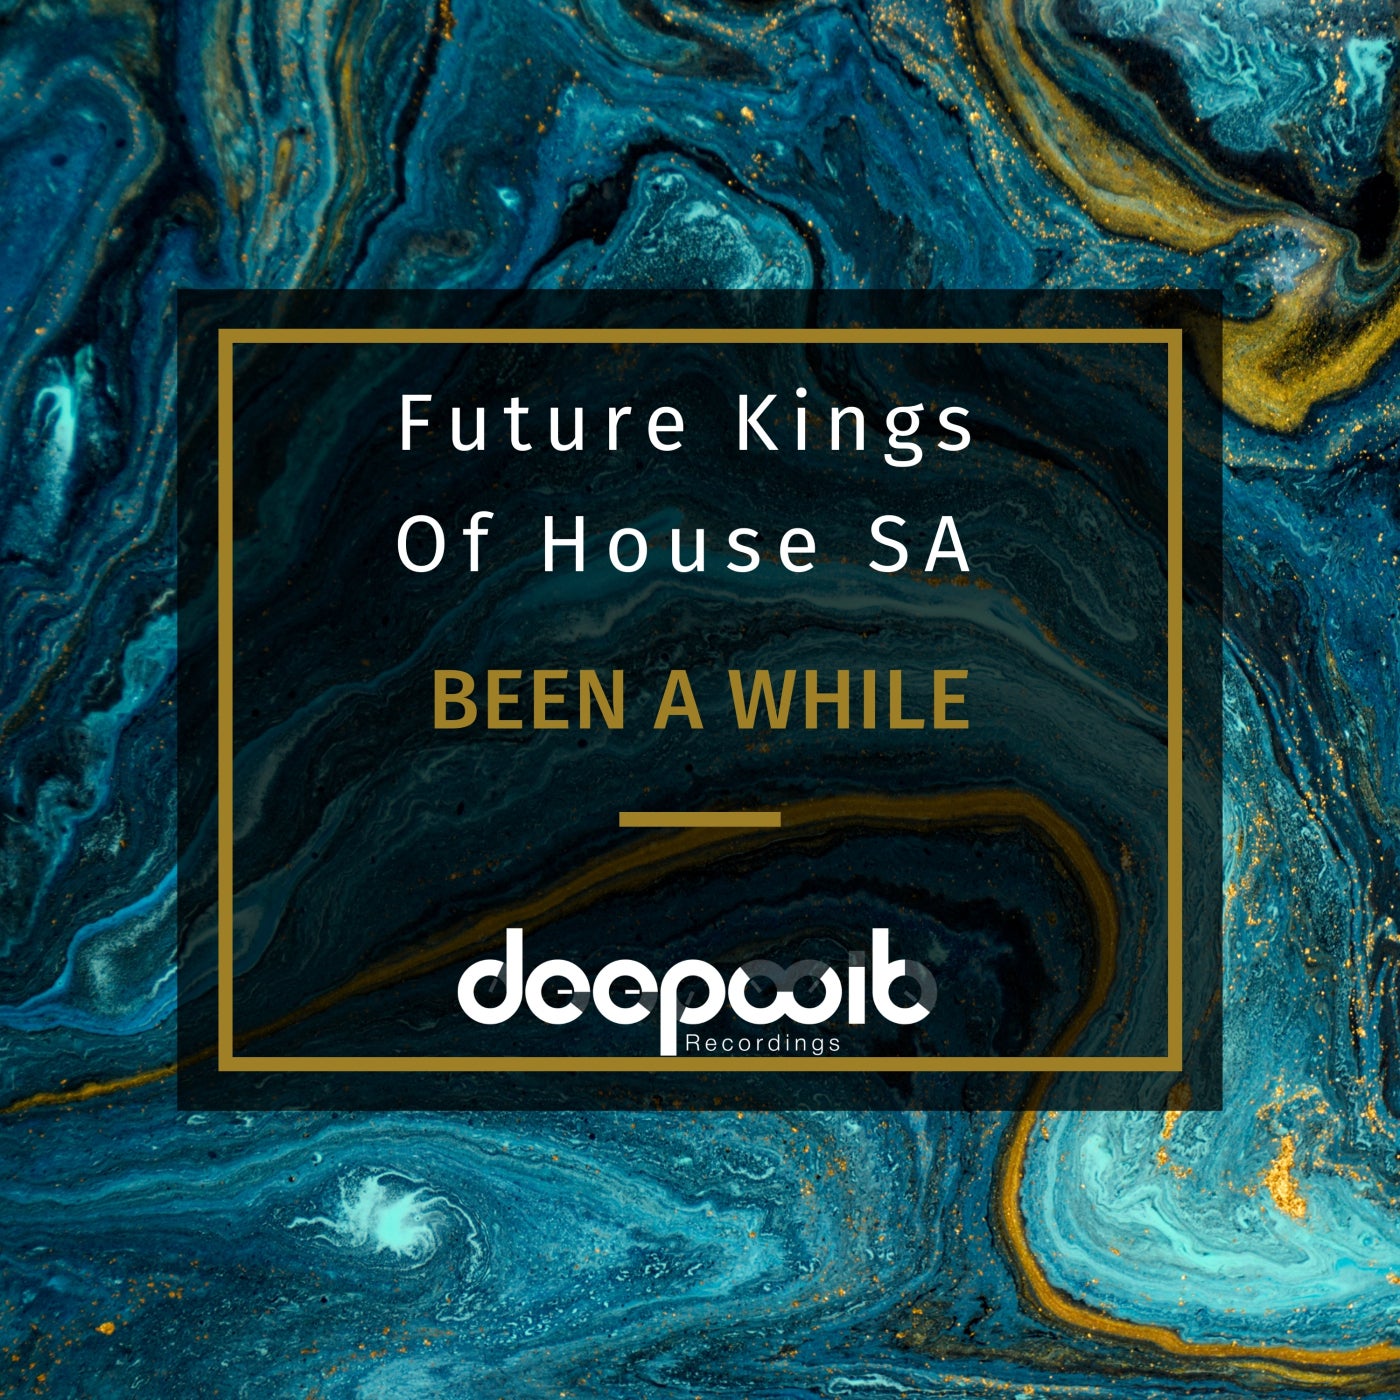 Future Kings of House SA - BEEN A WHILE [DWR129]